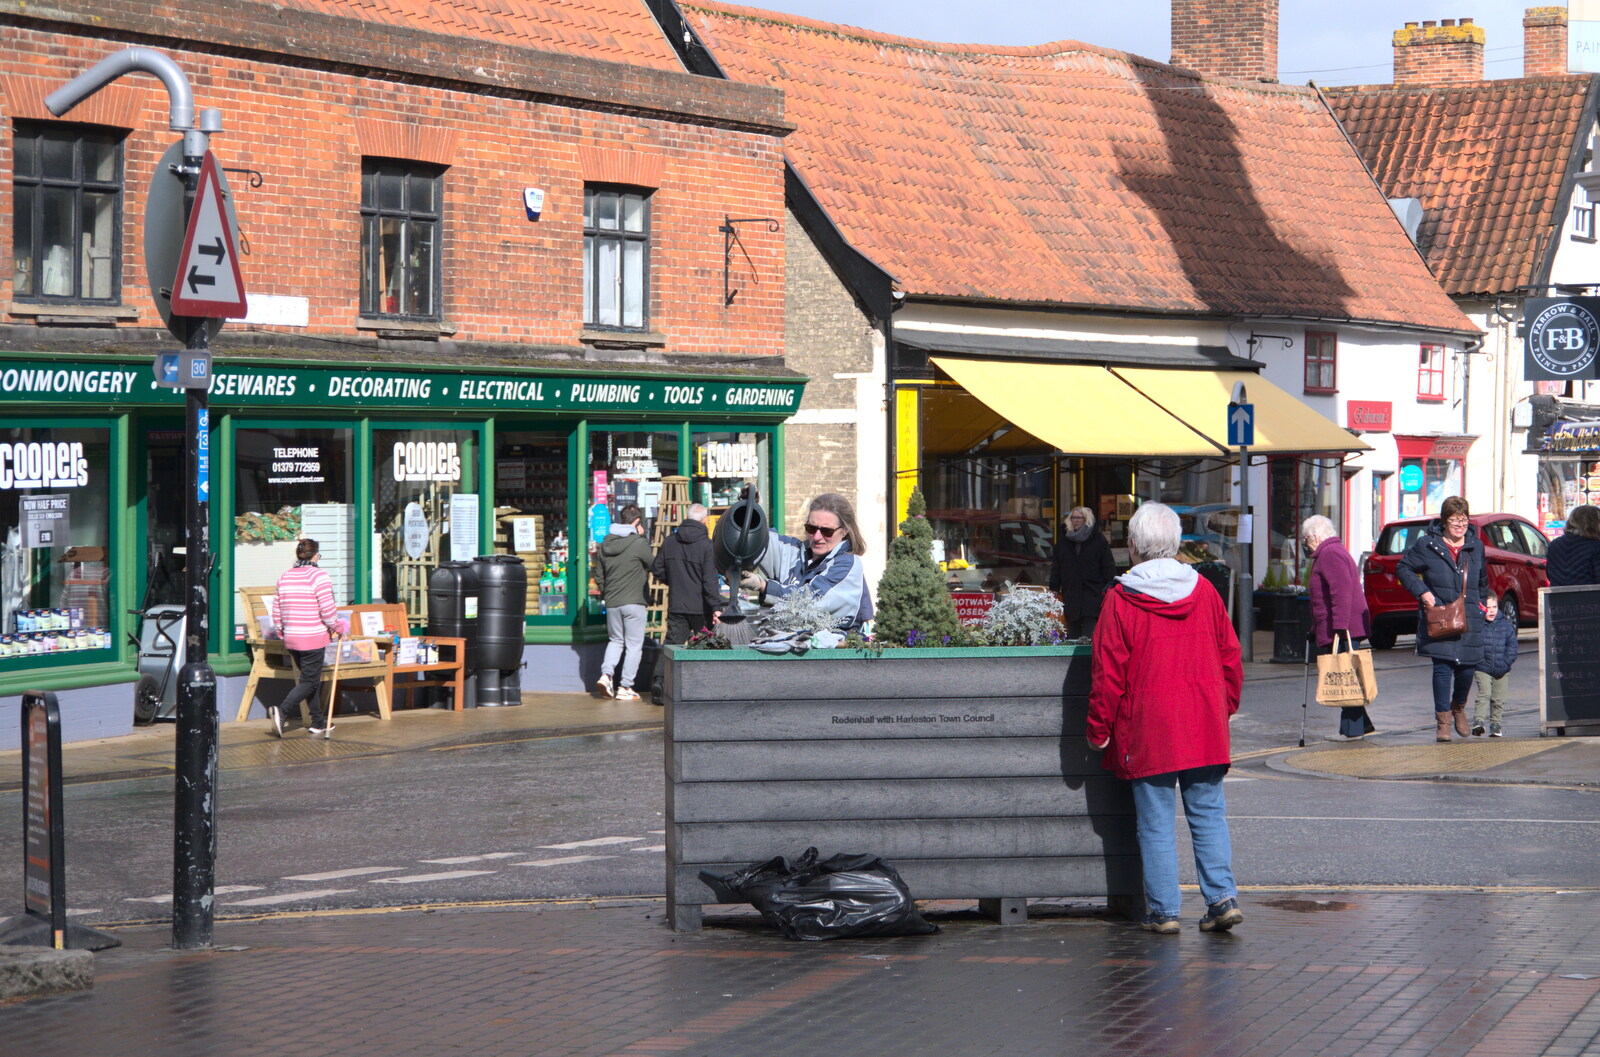 Lunch in Harleston, Norfolk - 1st March 2023: The outdoor flower tubs are repotted